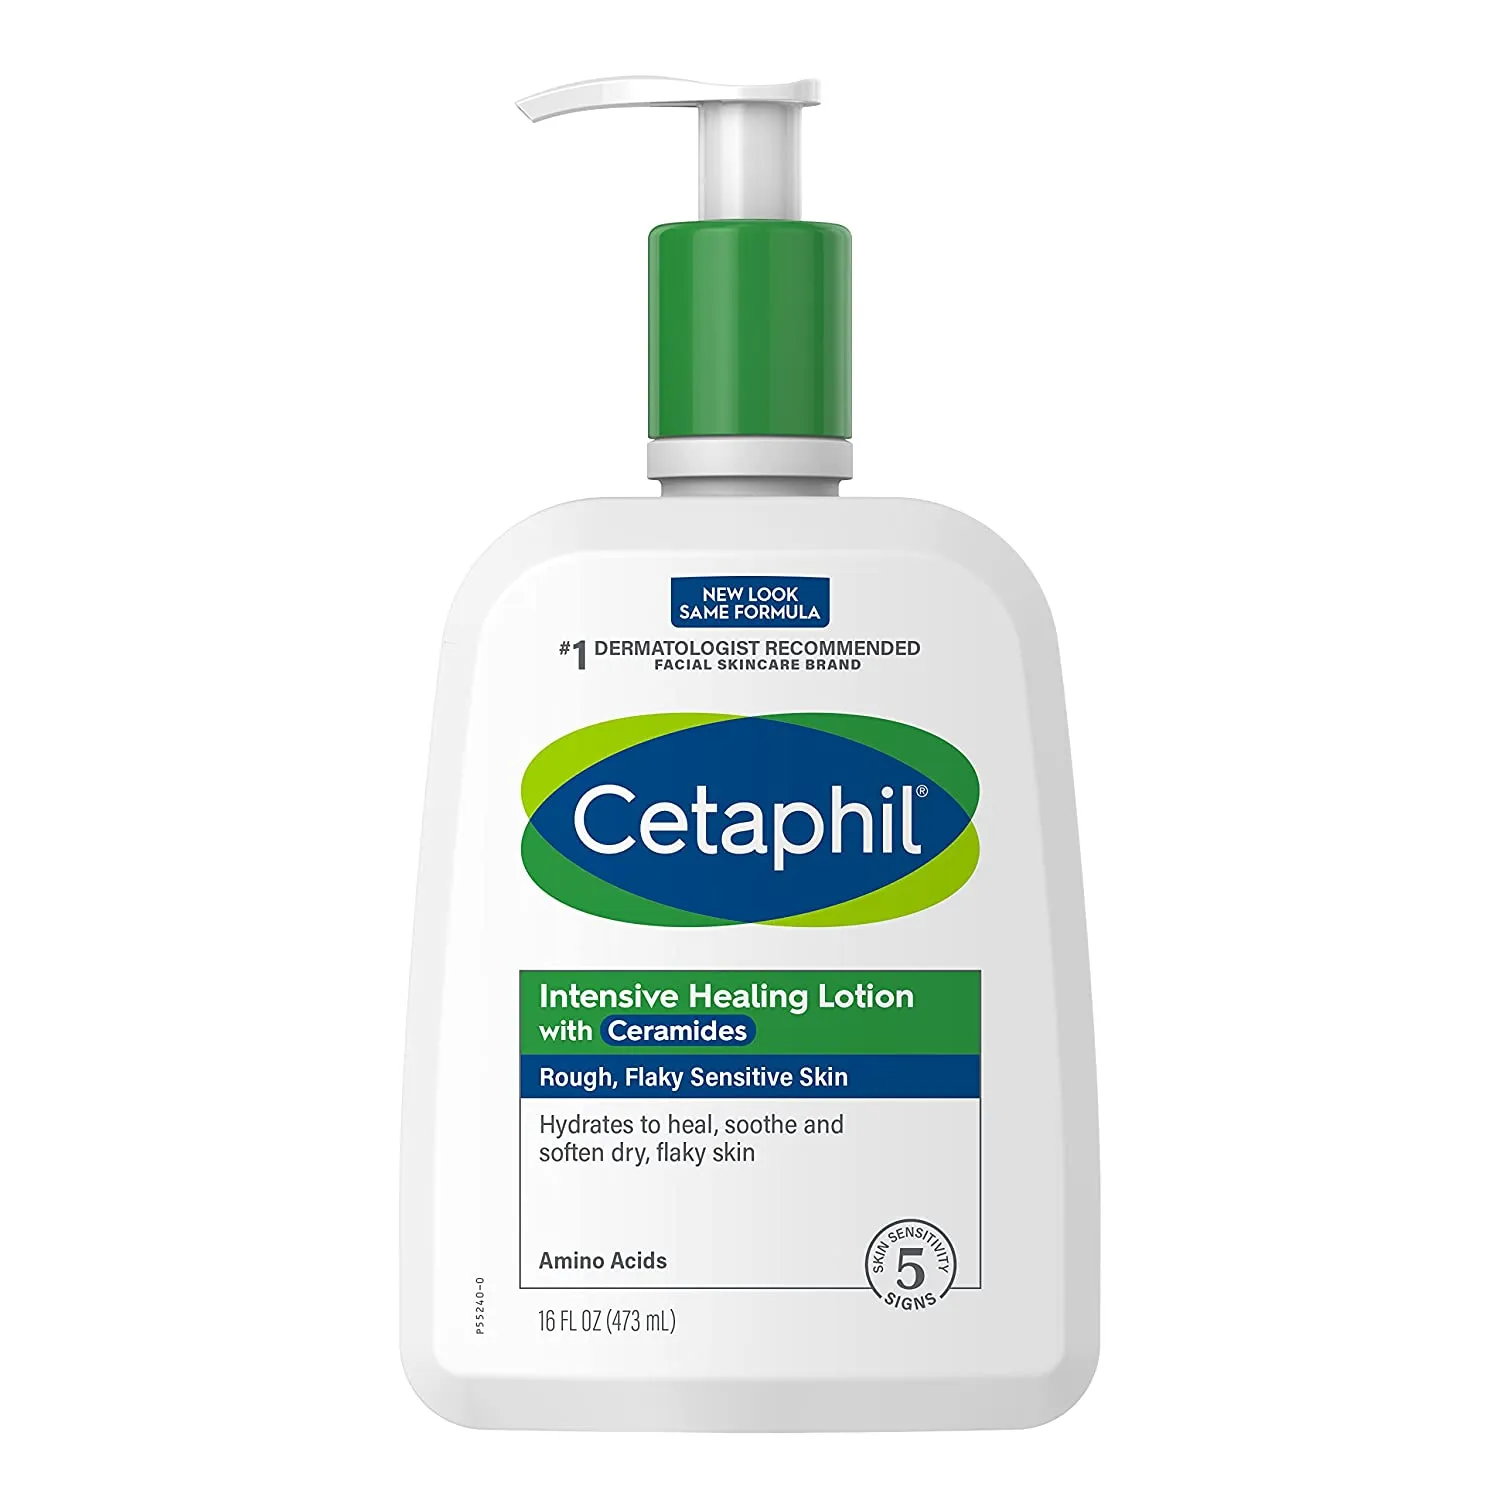 FEMMENORDIC's choice in the Aveeno vs Cetaphil comparison, the Intensive Healing Lotion by Cetaphil